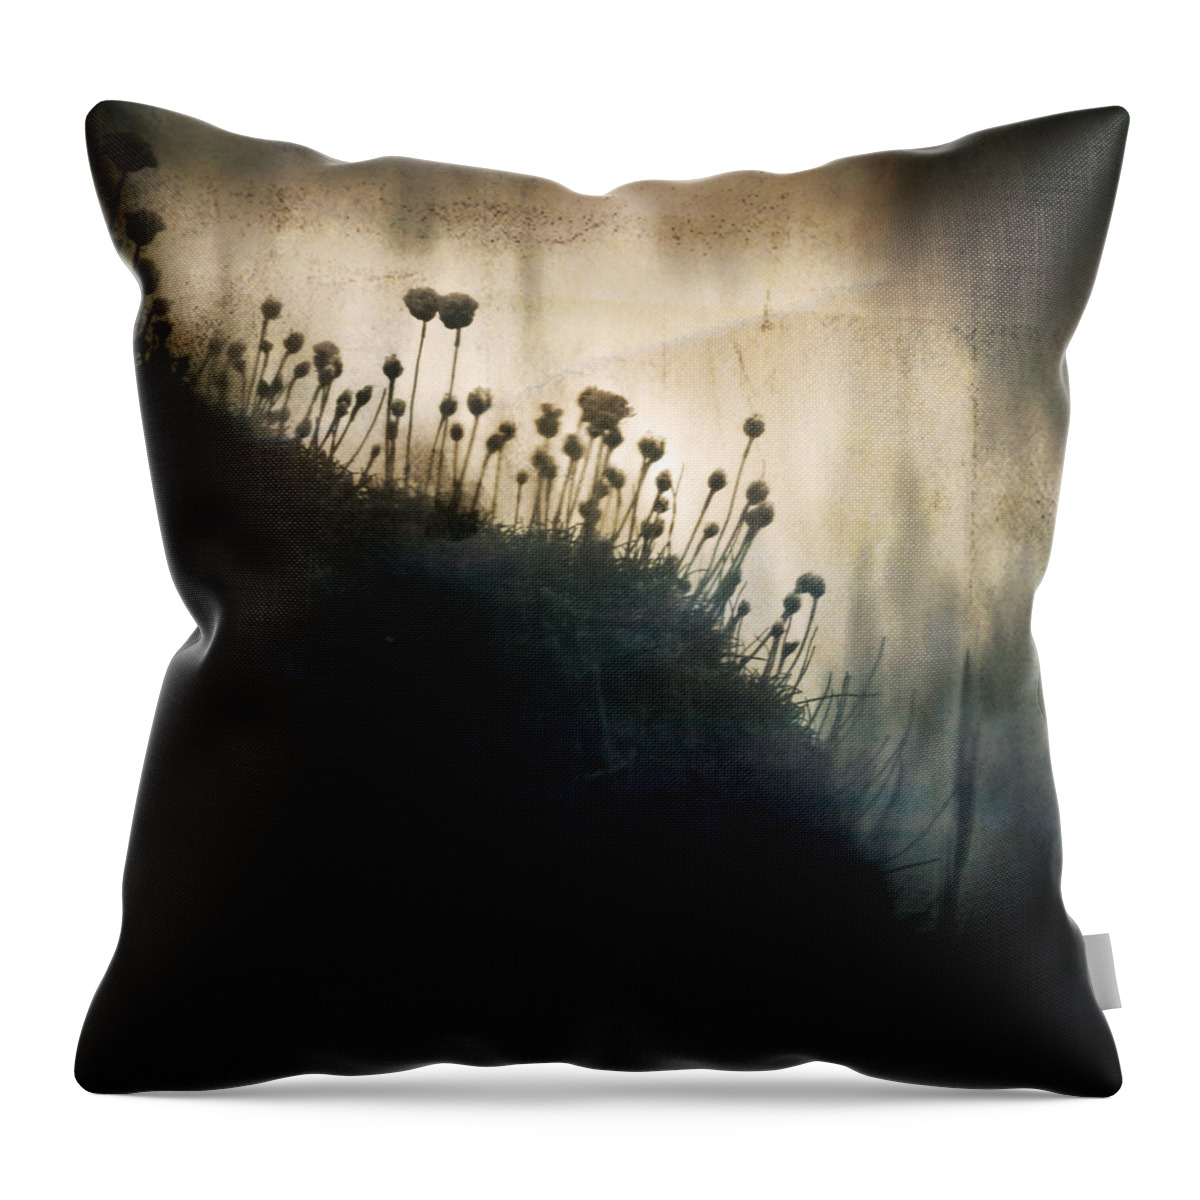 Grass Throw Pillow featuring the photograph Wild Things - Number 1 by Dorit Fuhg